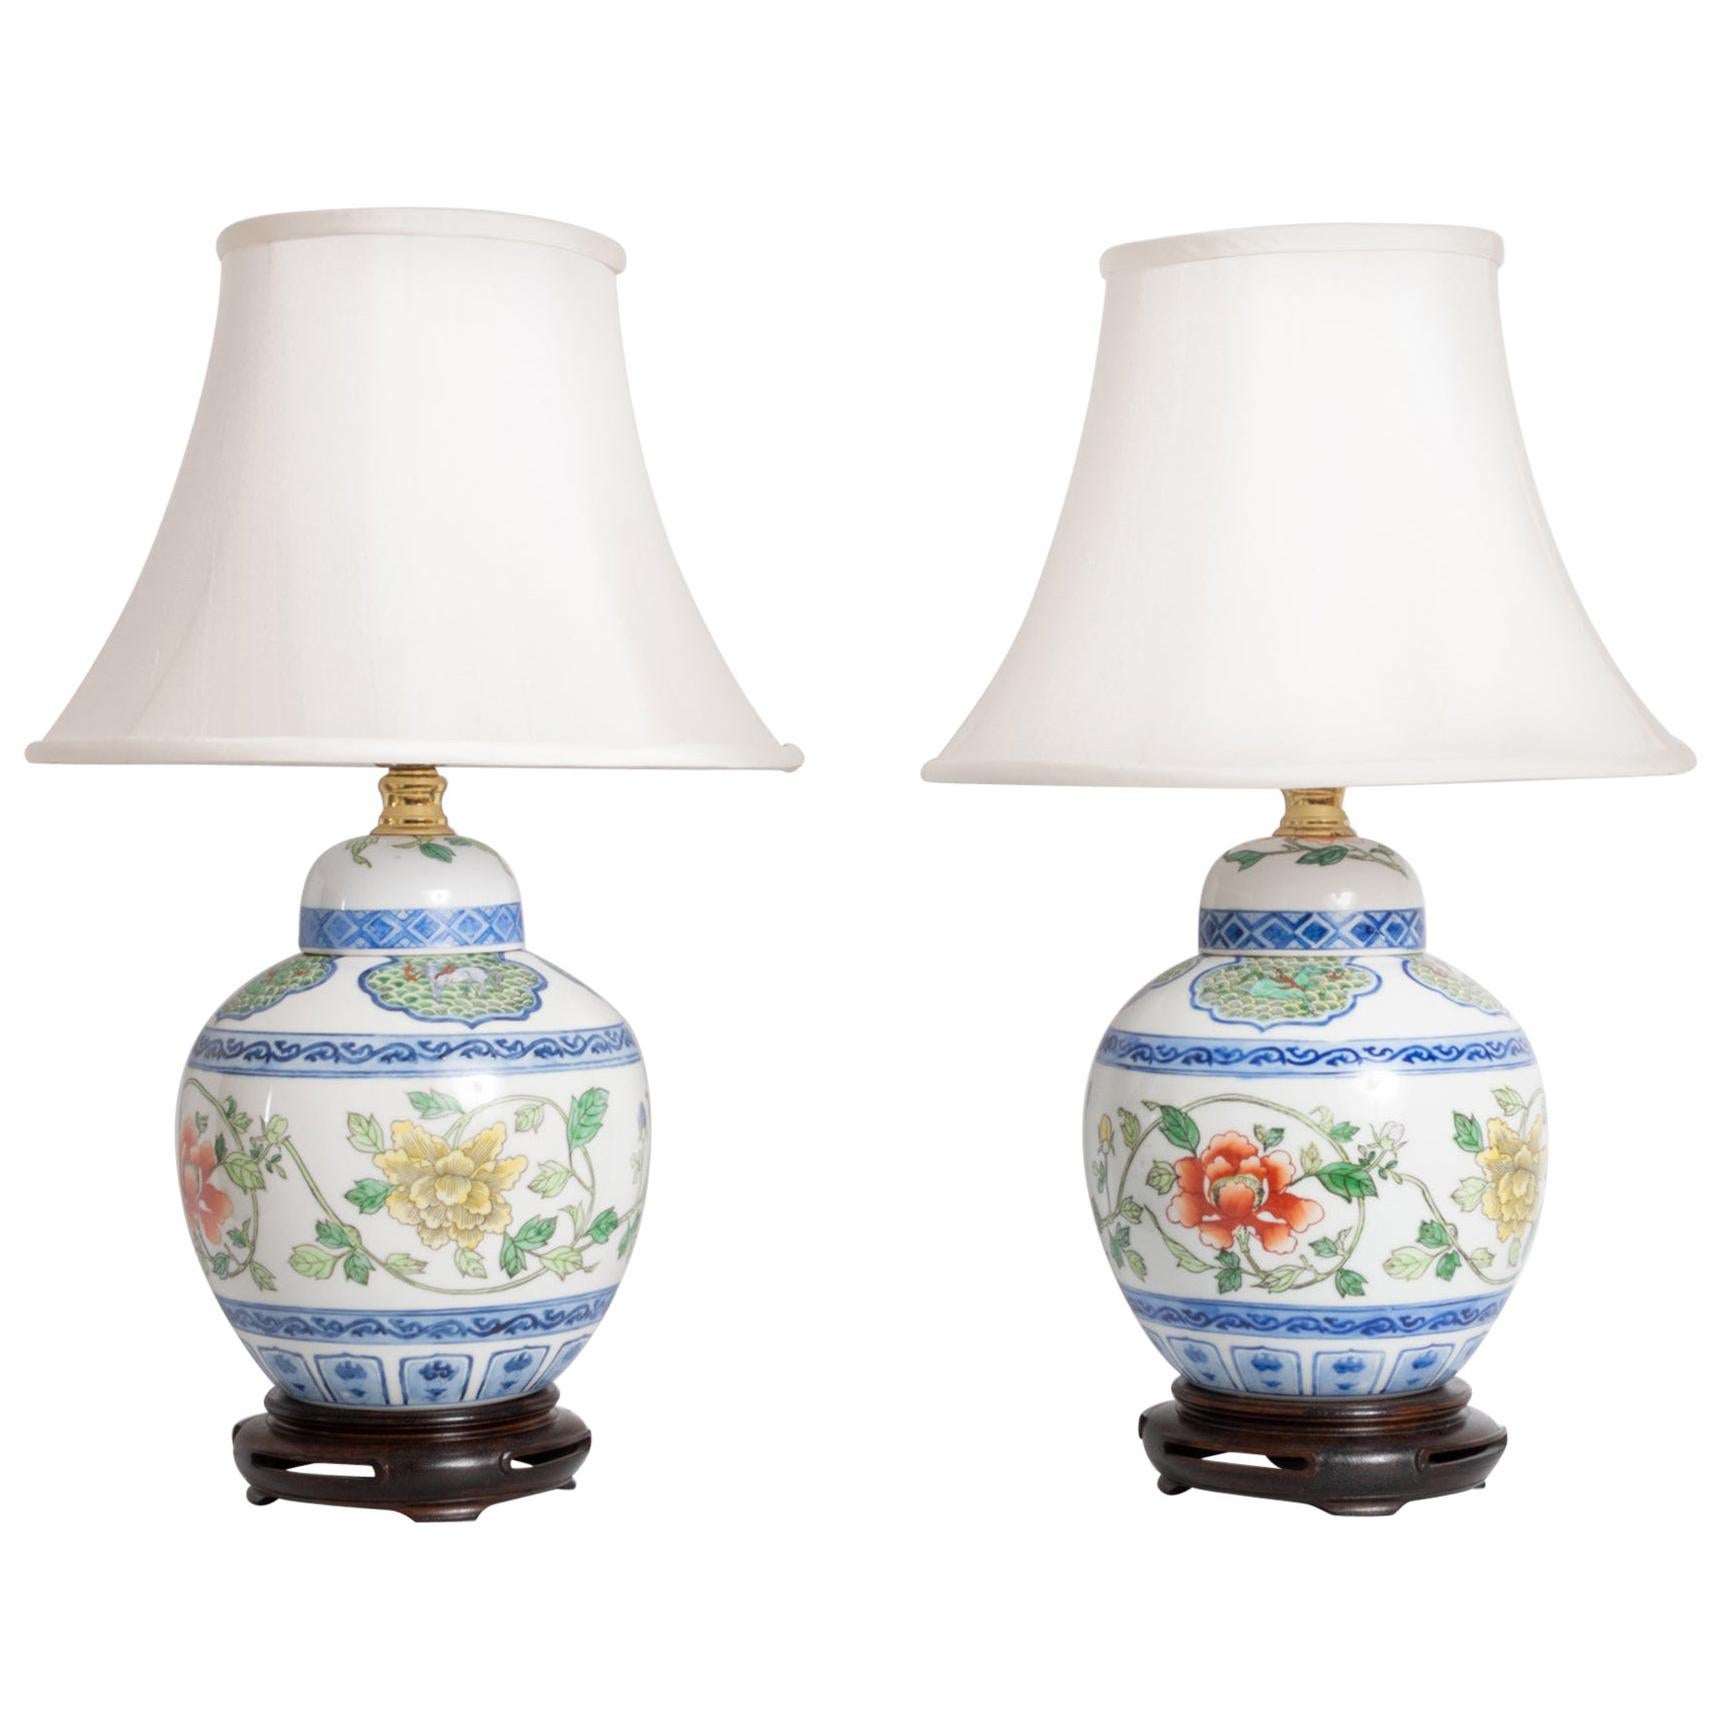 Pair of Maitland Smith Porcelain Chinese Ginger Jar Lamps, Hong Kong, circa 1970 For Sale